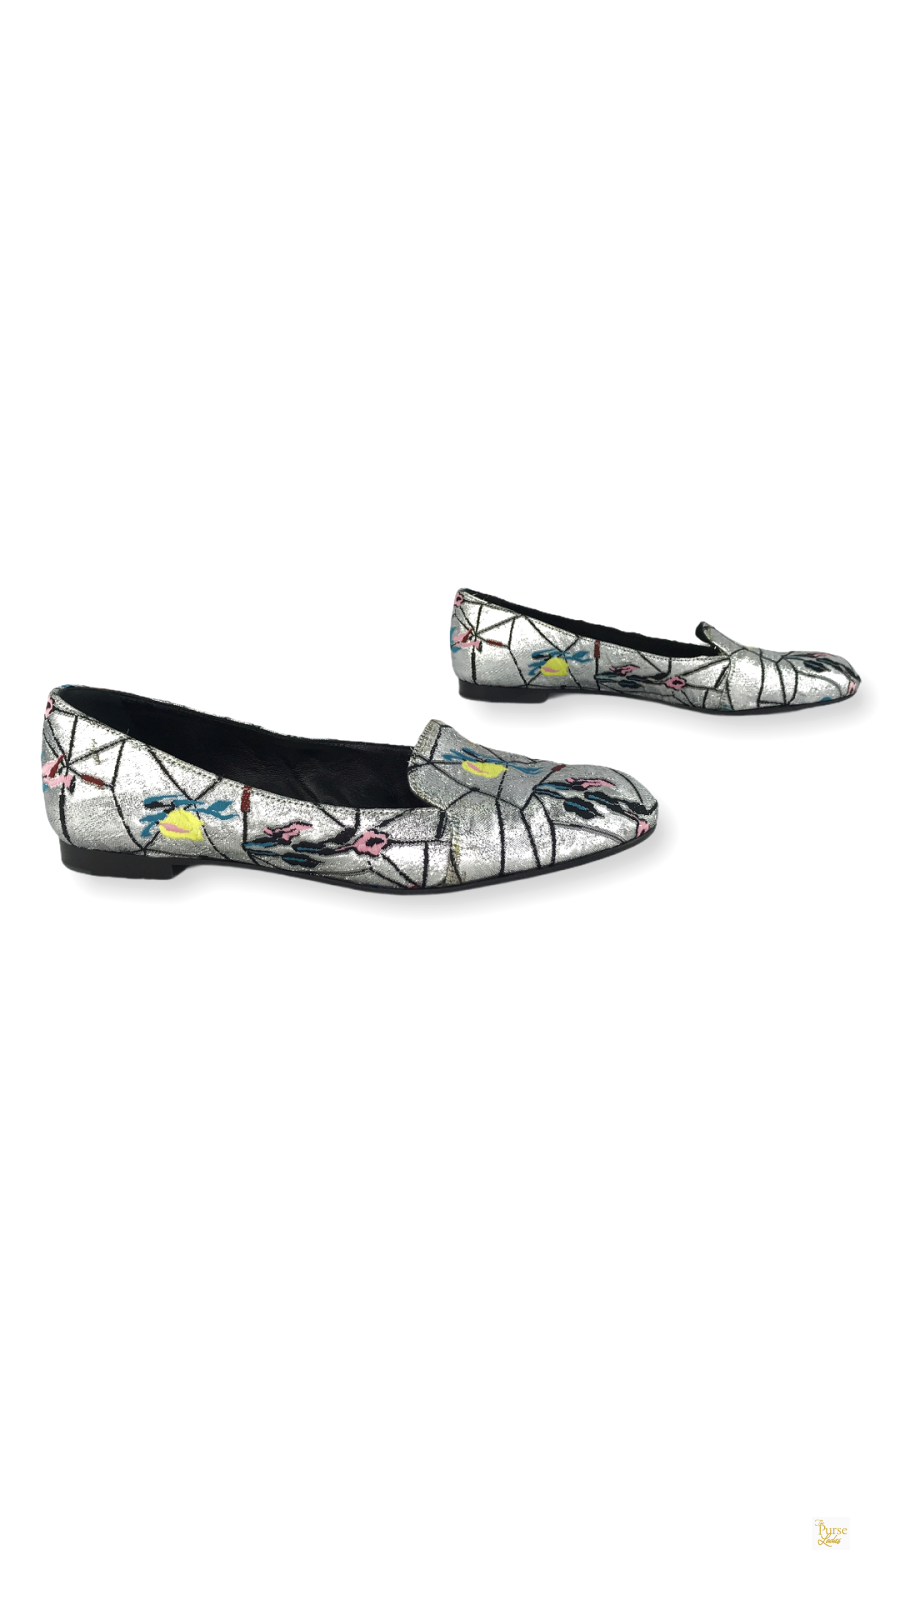 CHRISTIAN DIOR Silver Metallic Floral Brocade Loafers